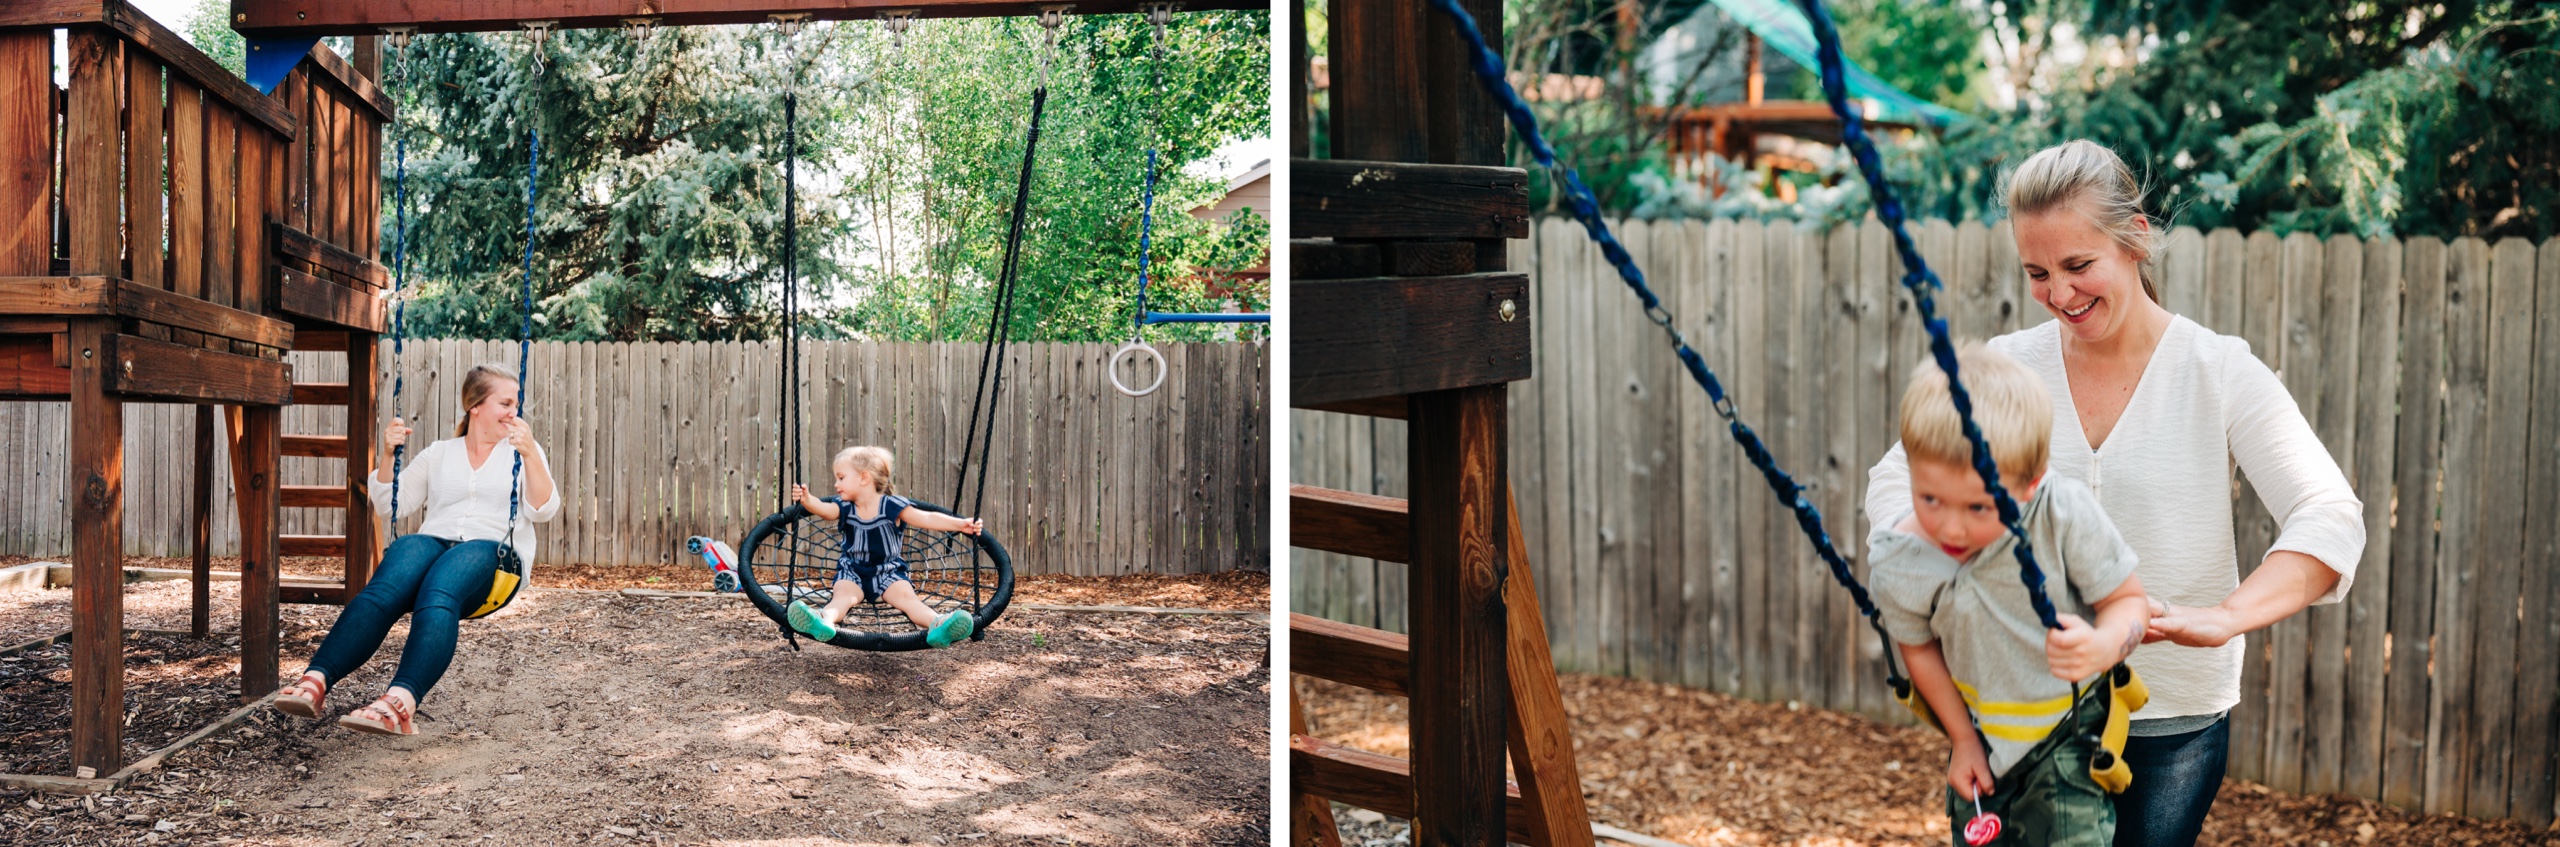 erie colorado family photography, swinging in the backyard